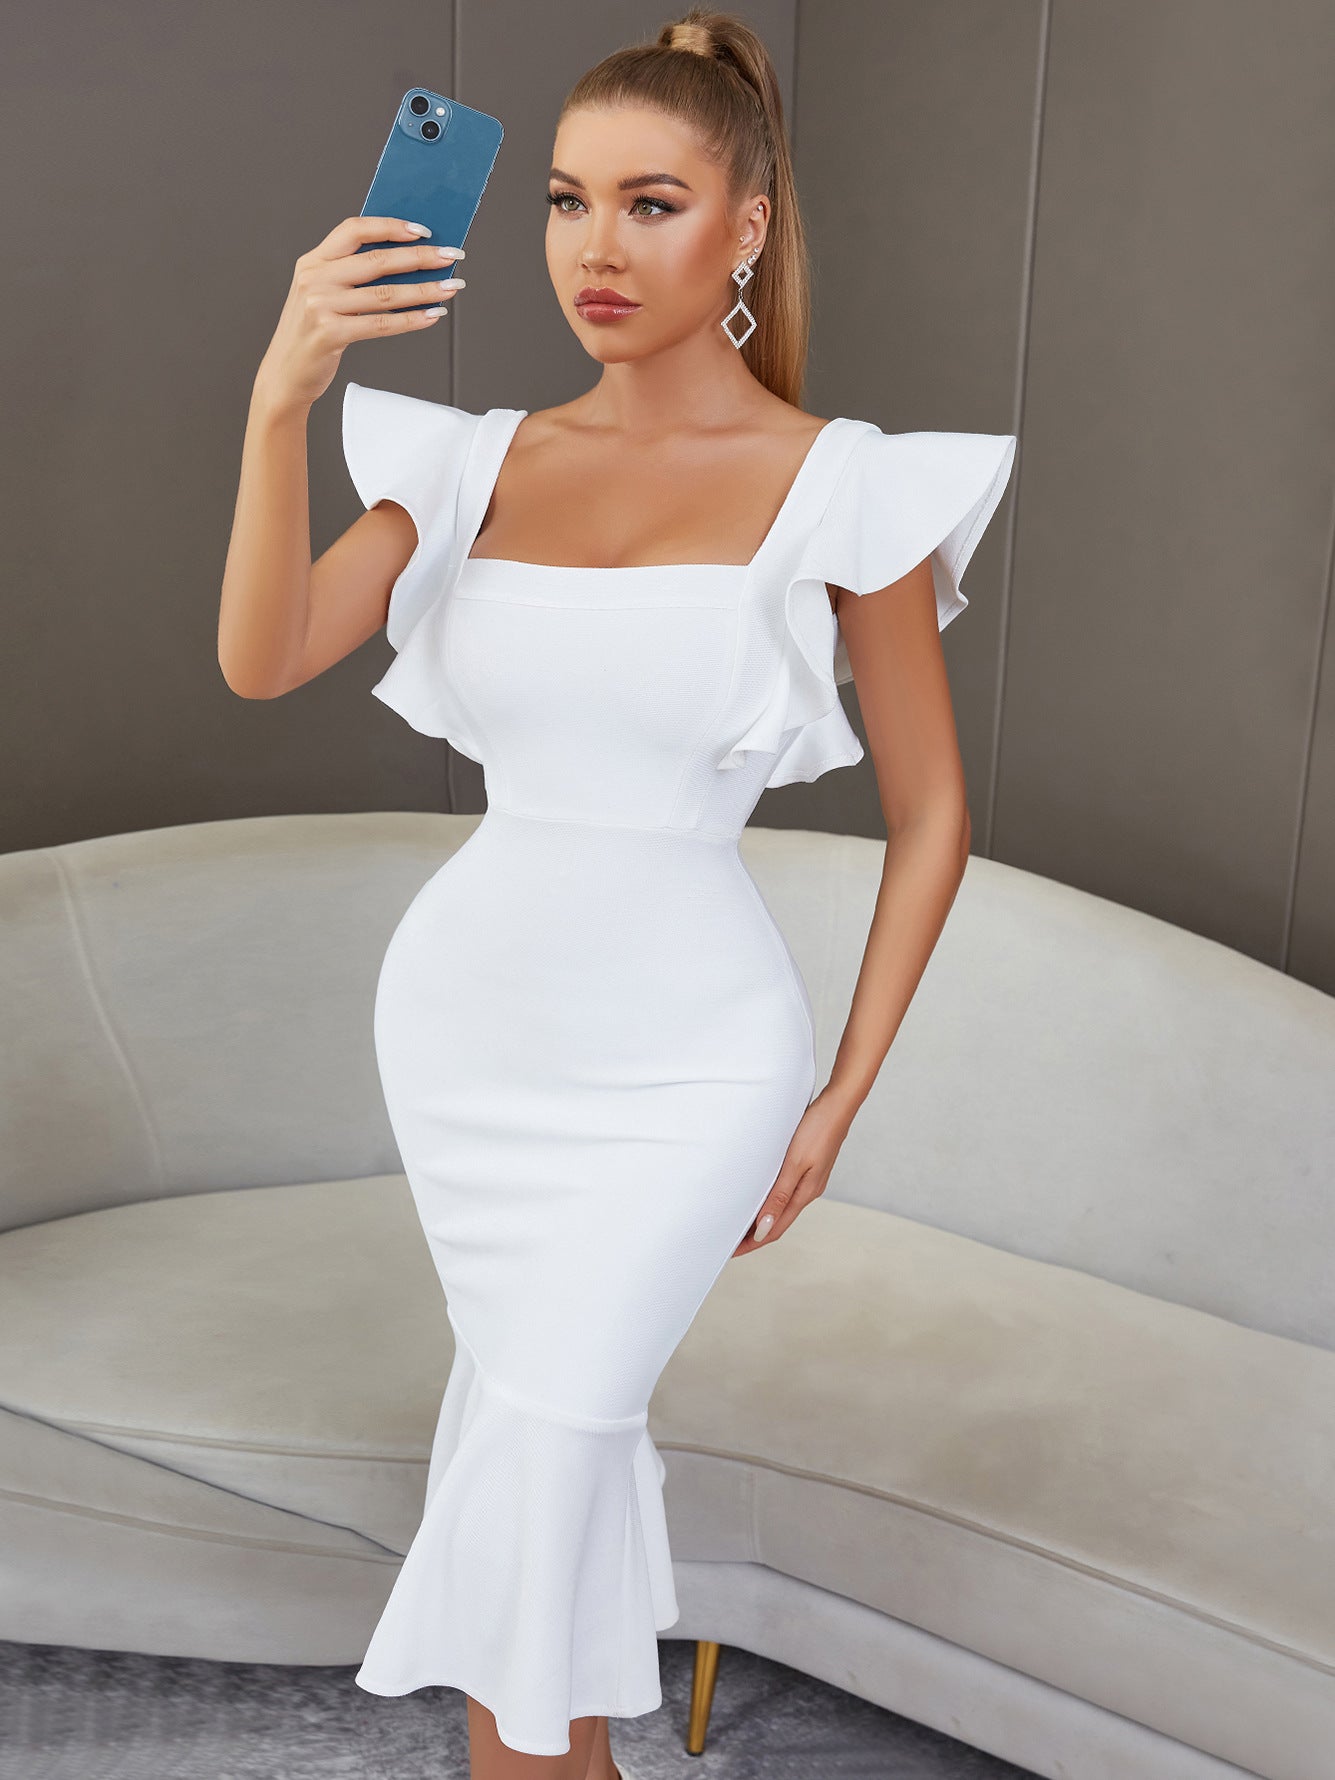 Summer Sexy Butterfly Sleeve Ruffled Flared Bandage One Piece Dress Socialite Club Wedding Party Dress